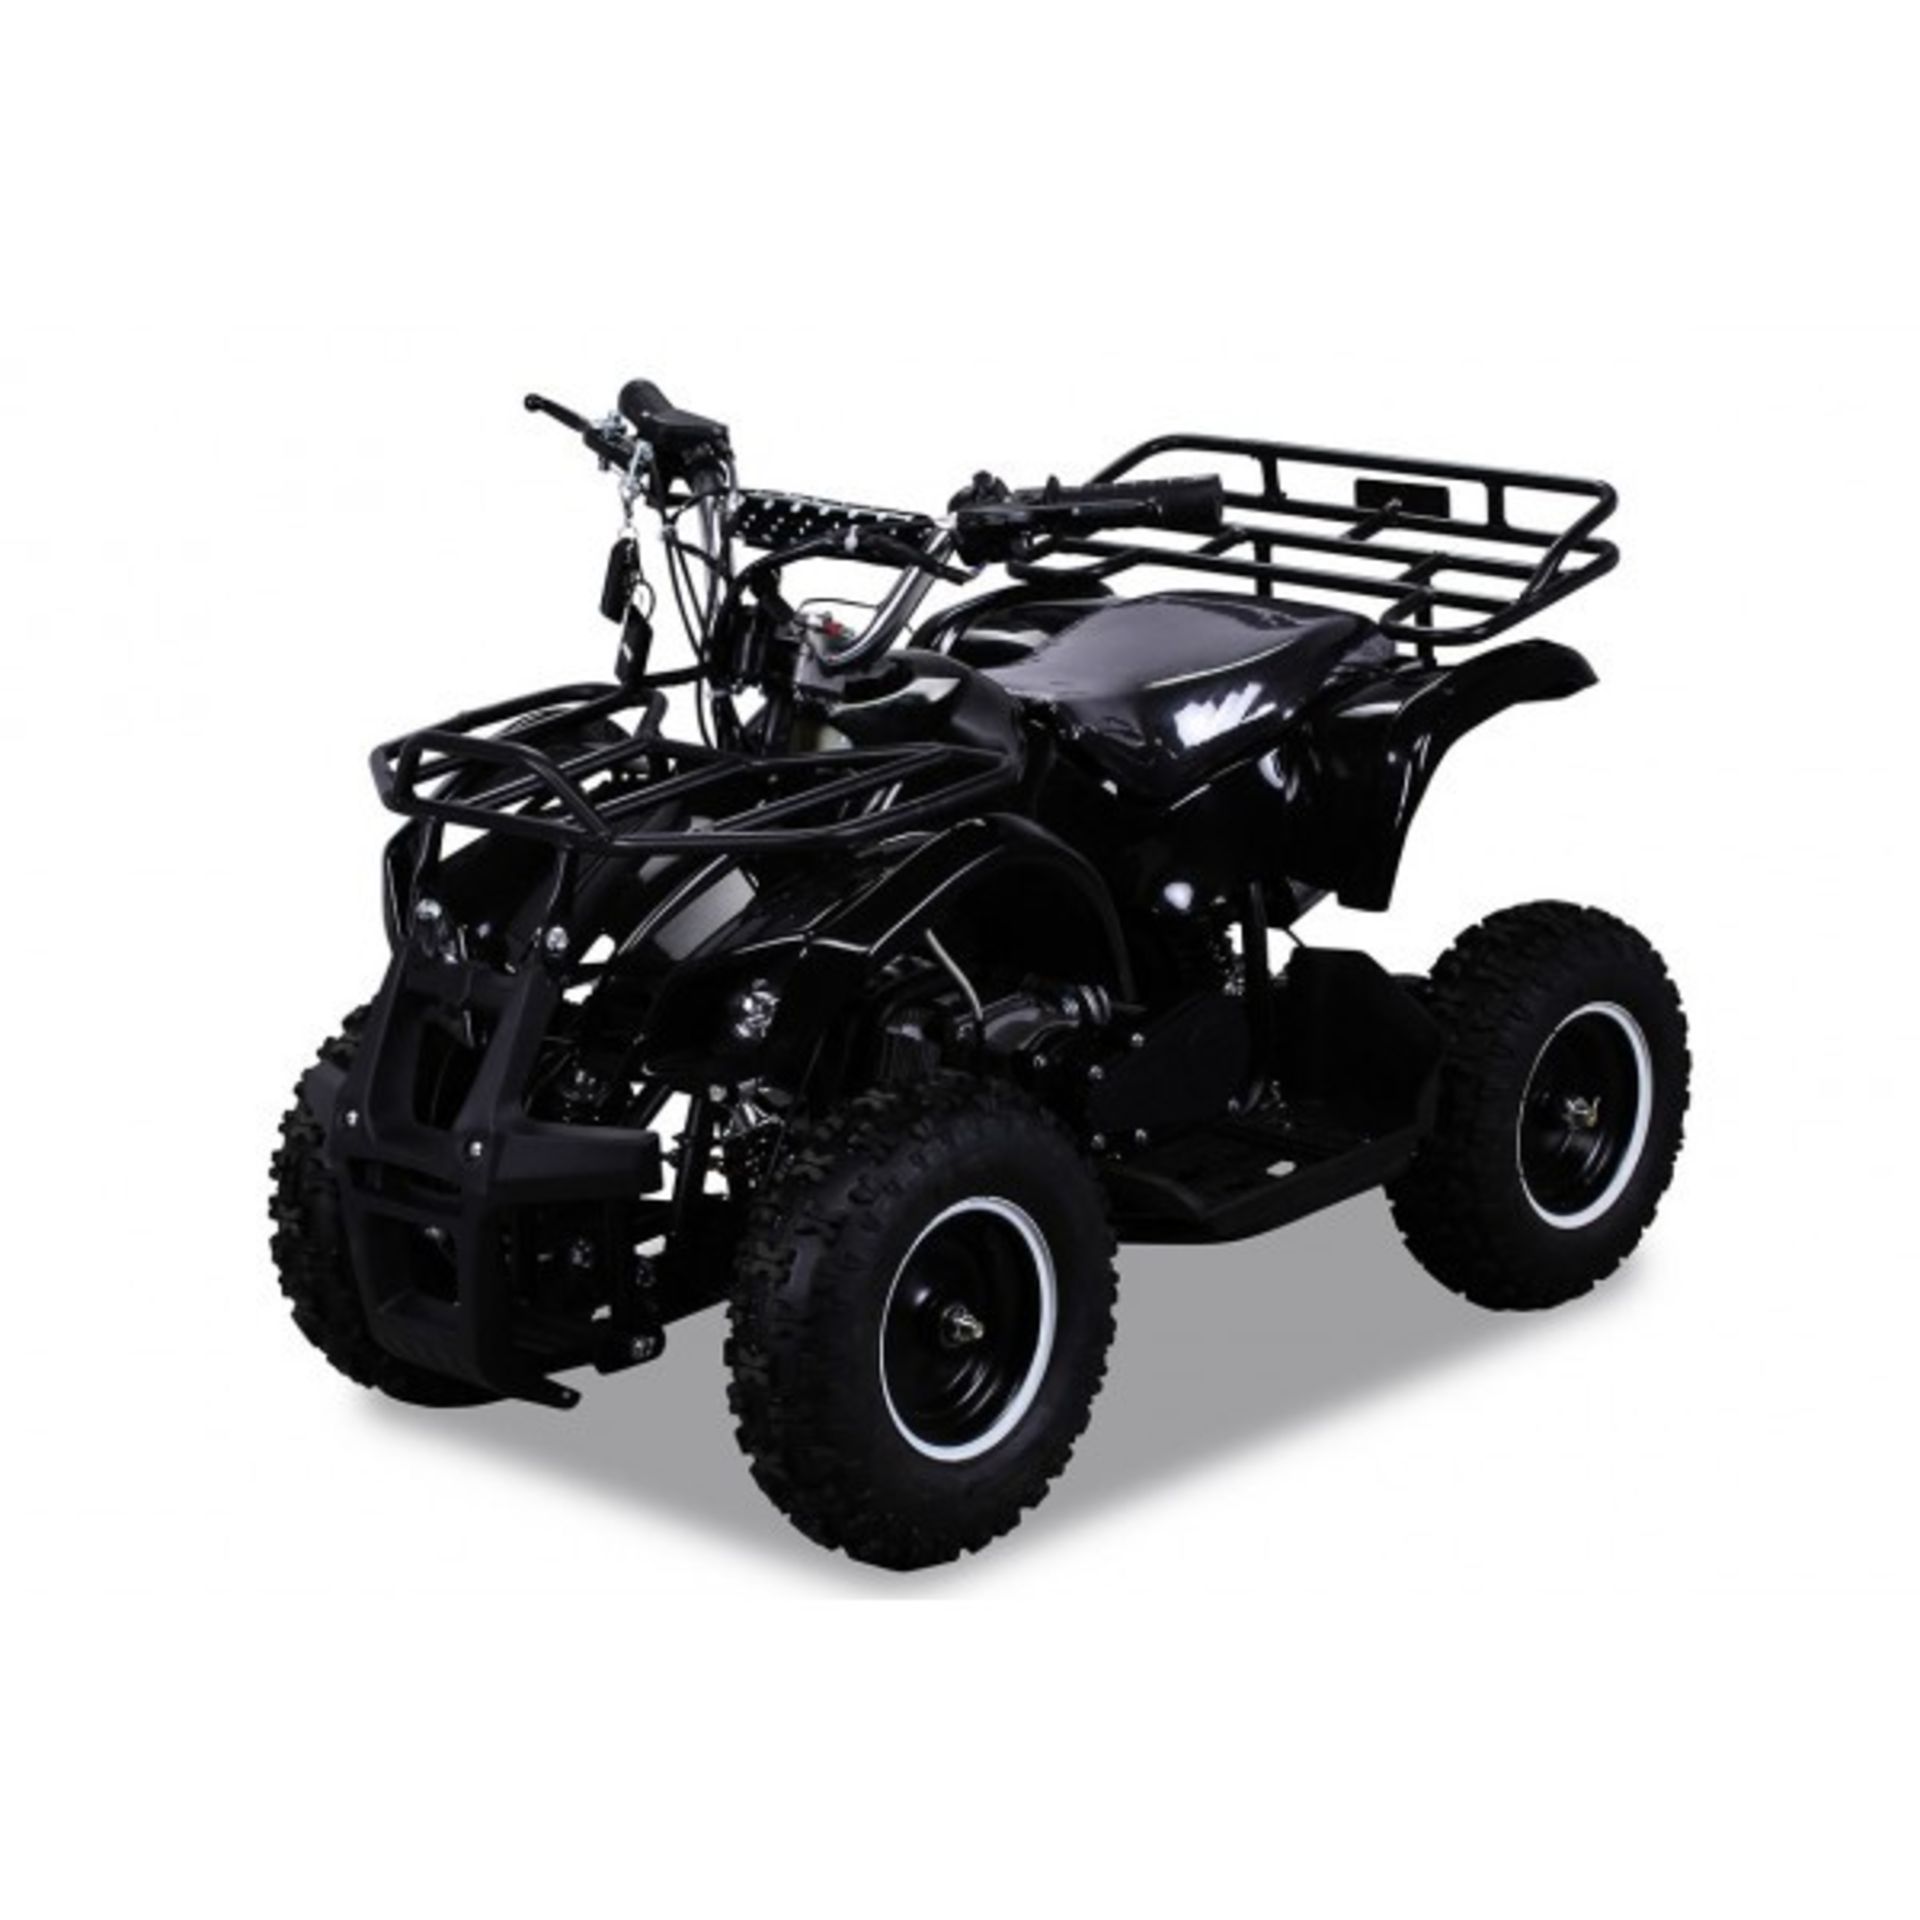 V Brand New 50cc Mini Quad Bike FRM - Colours May Vary - Front & Rear Frames - Picture May Vary From - Image 2 of 6